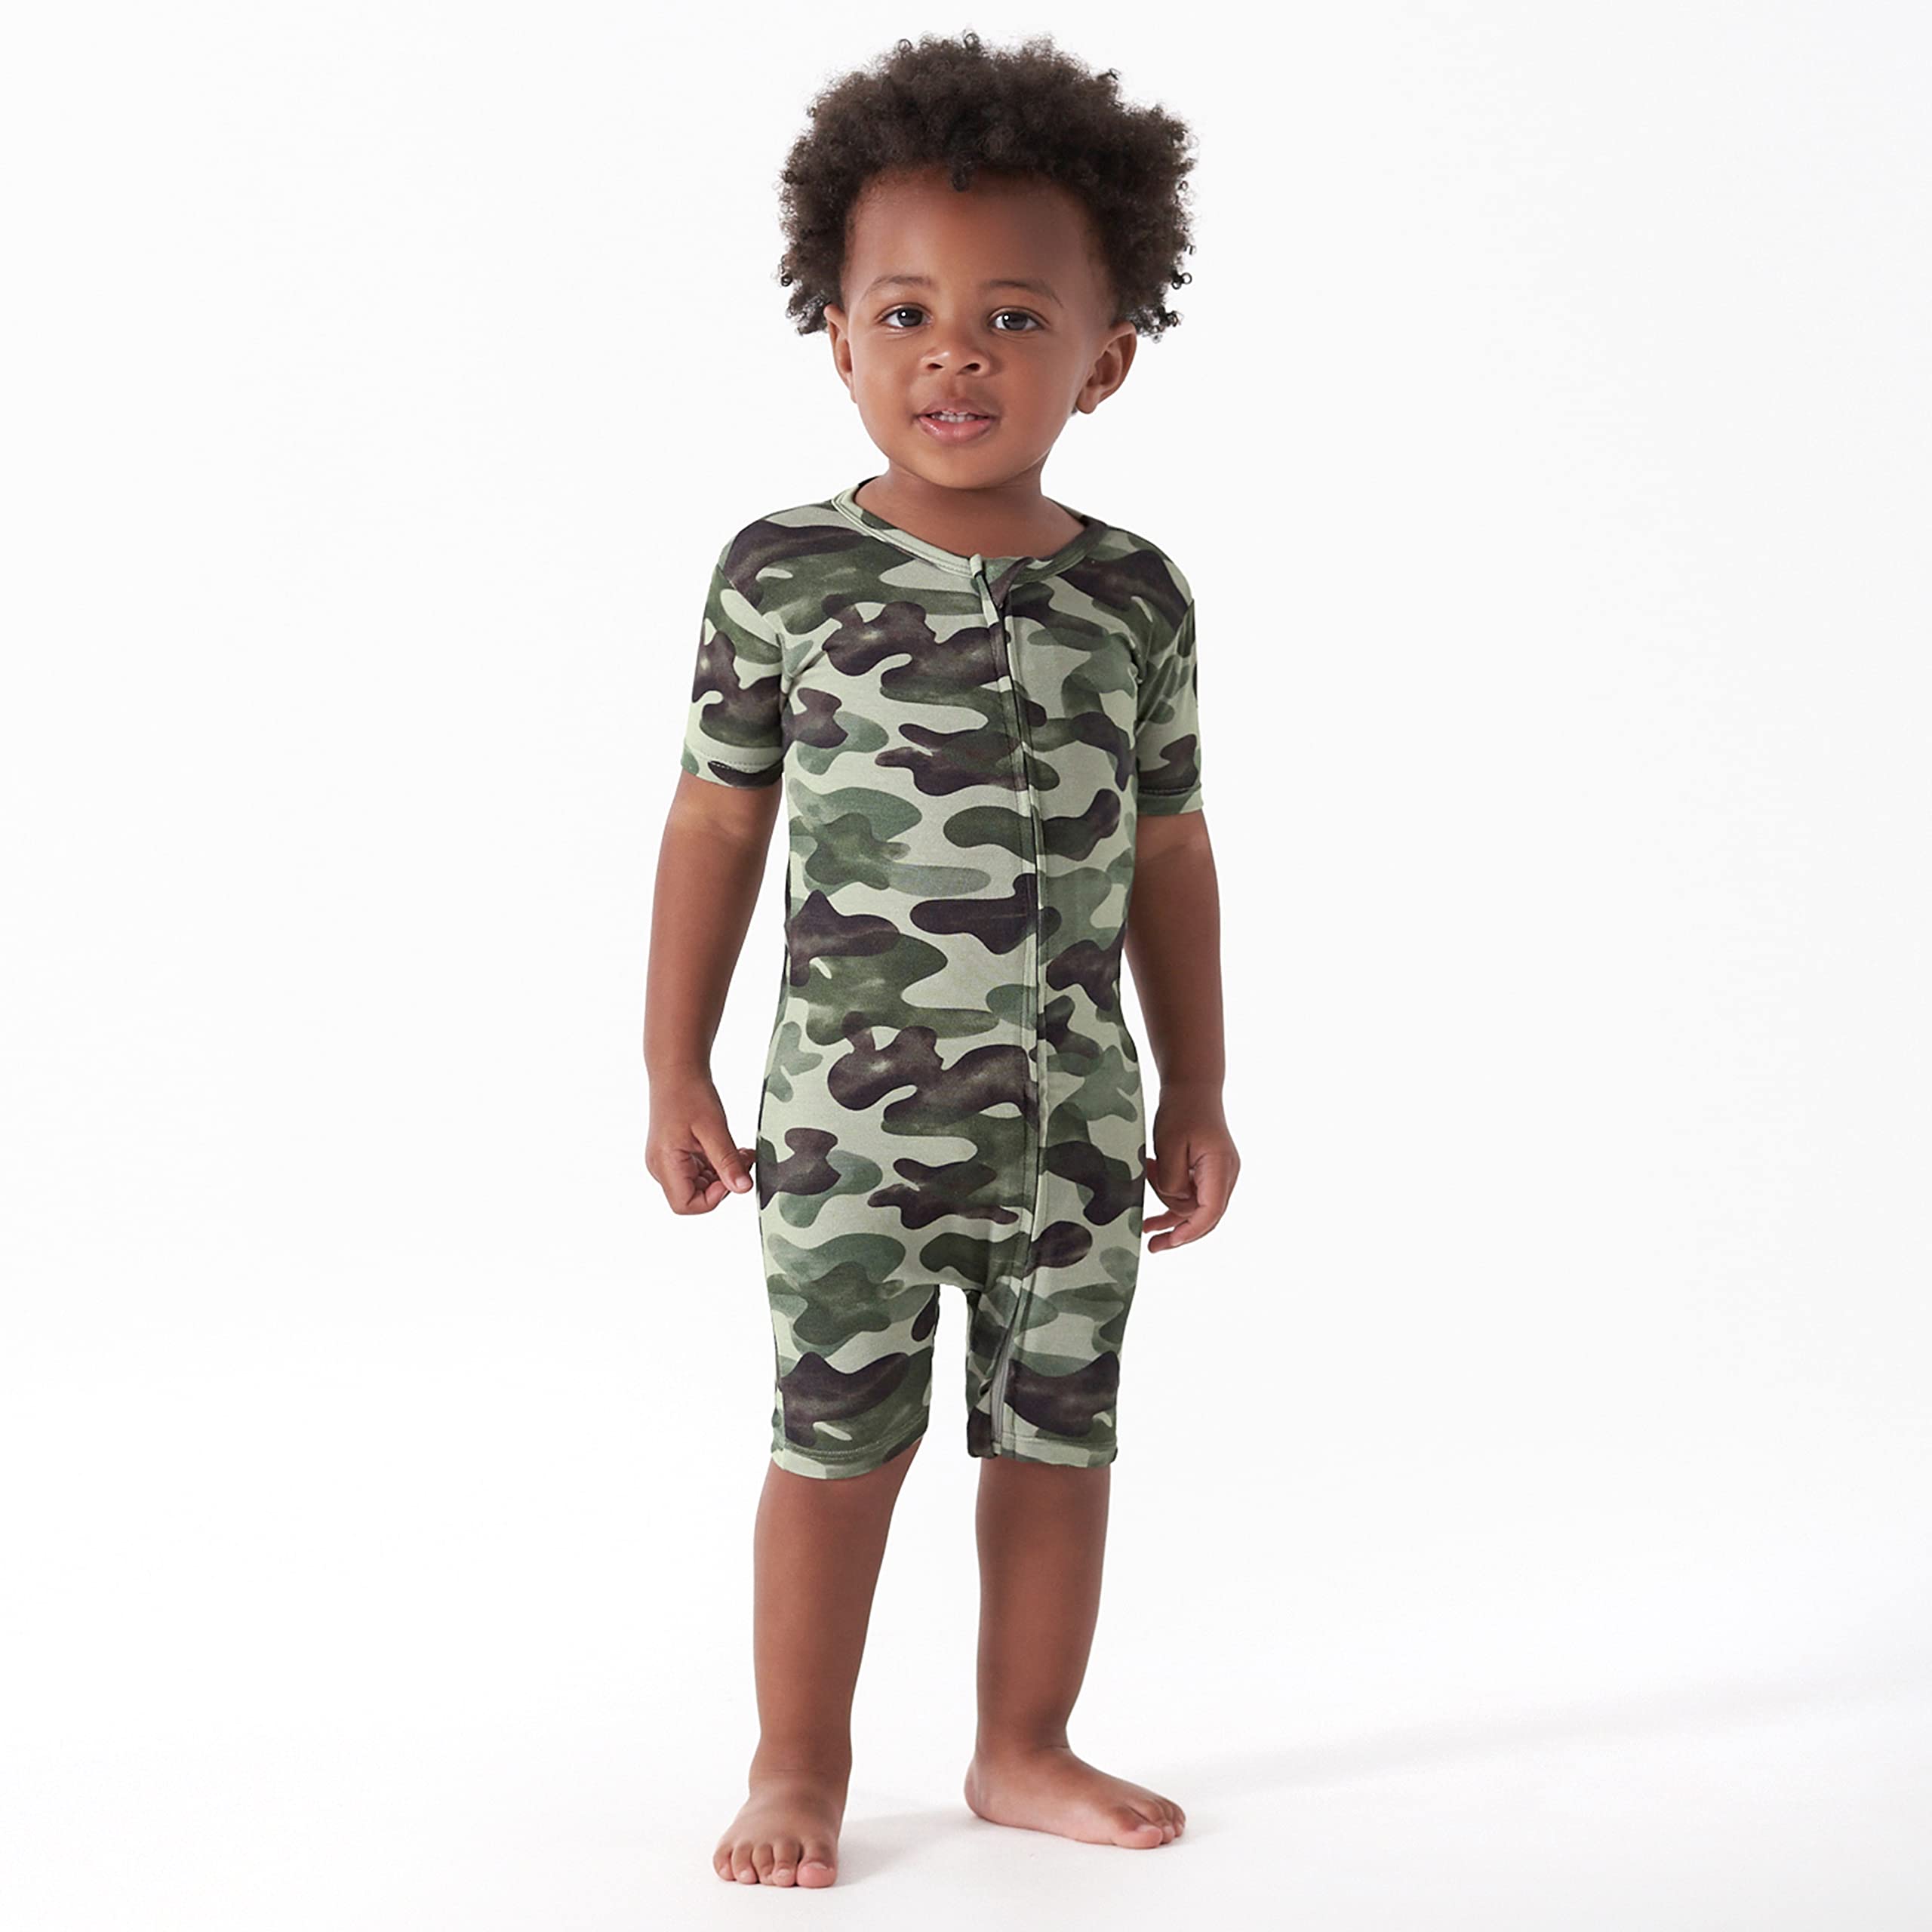 Gerber Unisex Baby Buttery Soft Short Sleeve Romper with Viscose Made from Eucalyptus